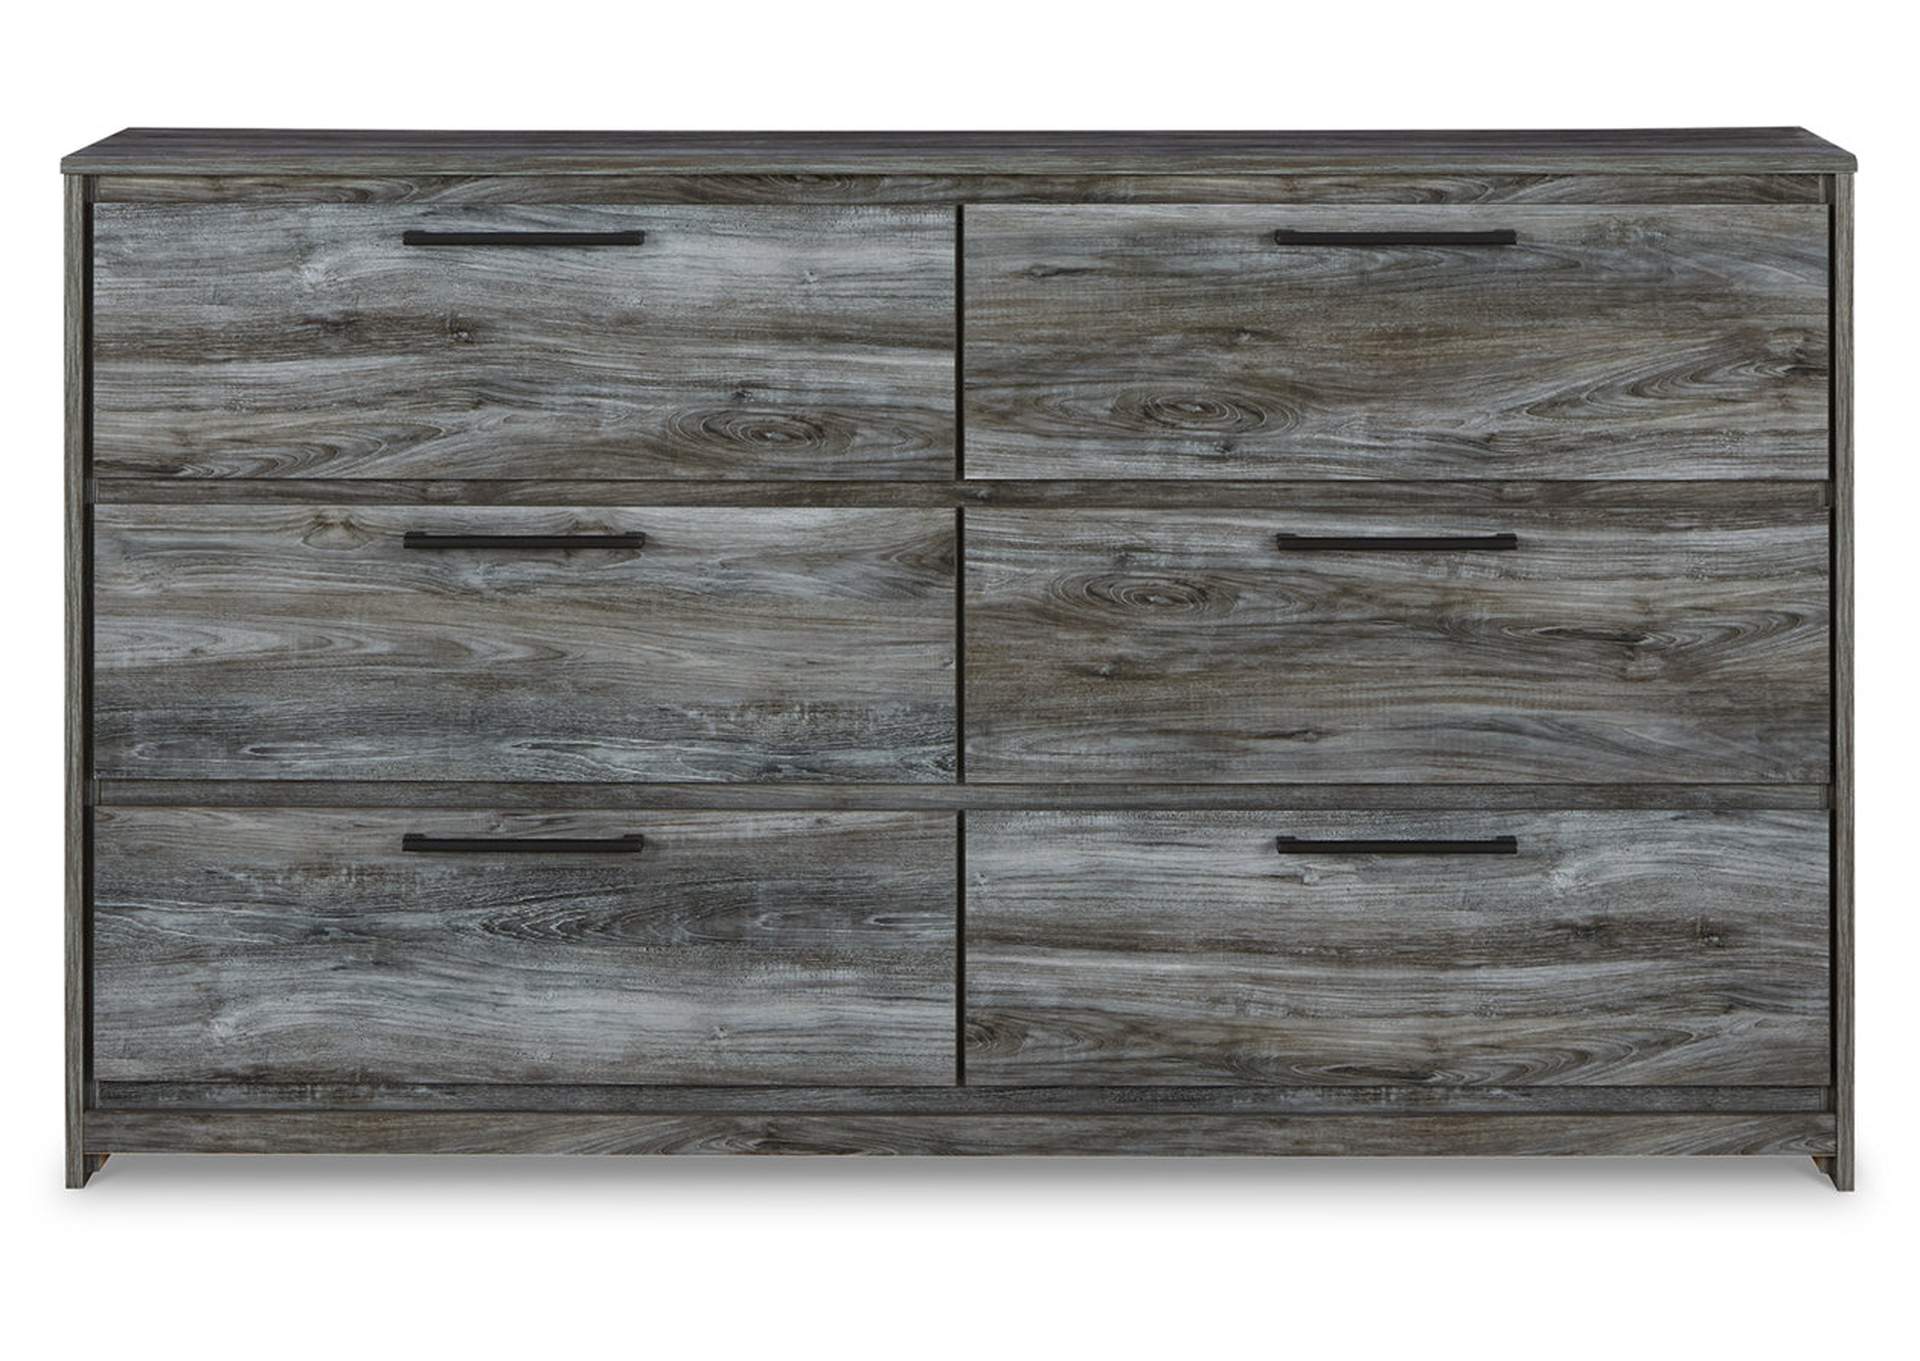 Baystorm King Panel Headboard with Dresser,Signature Design By Ashley